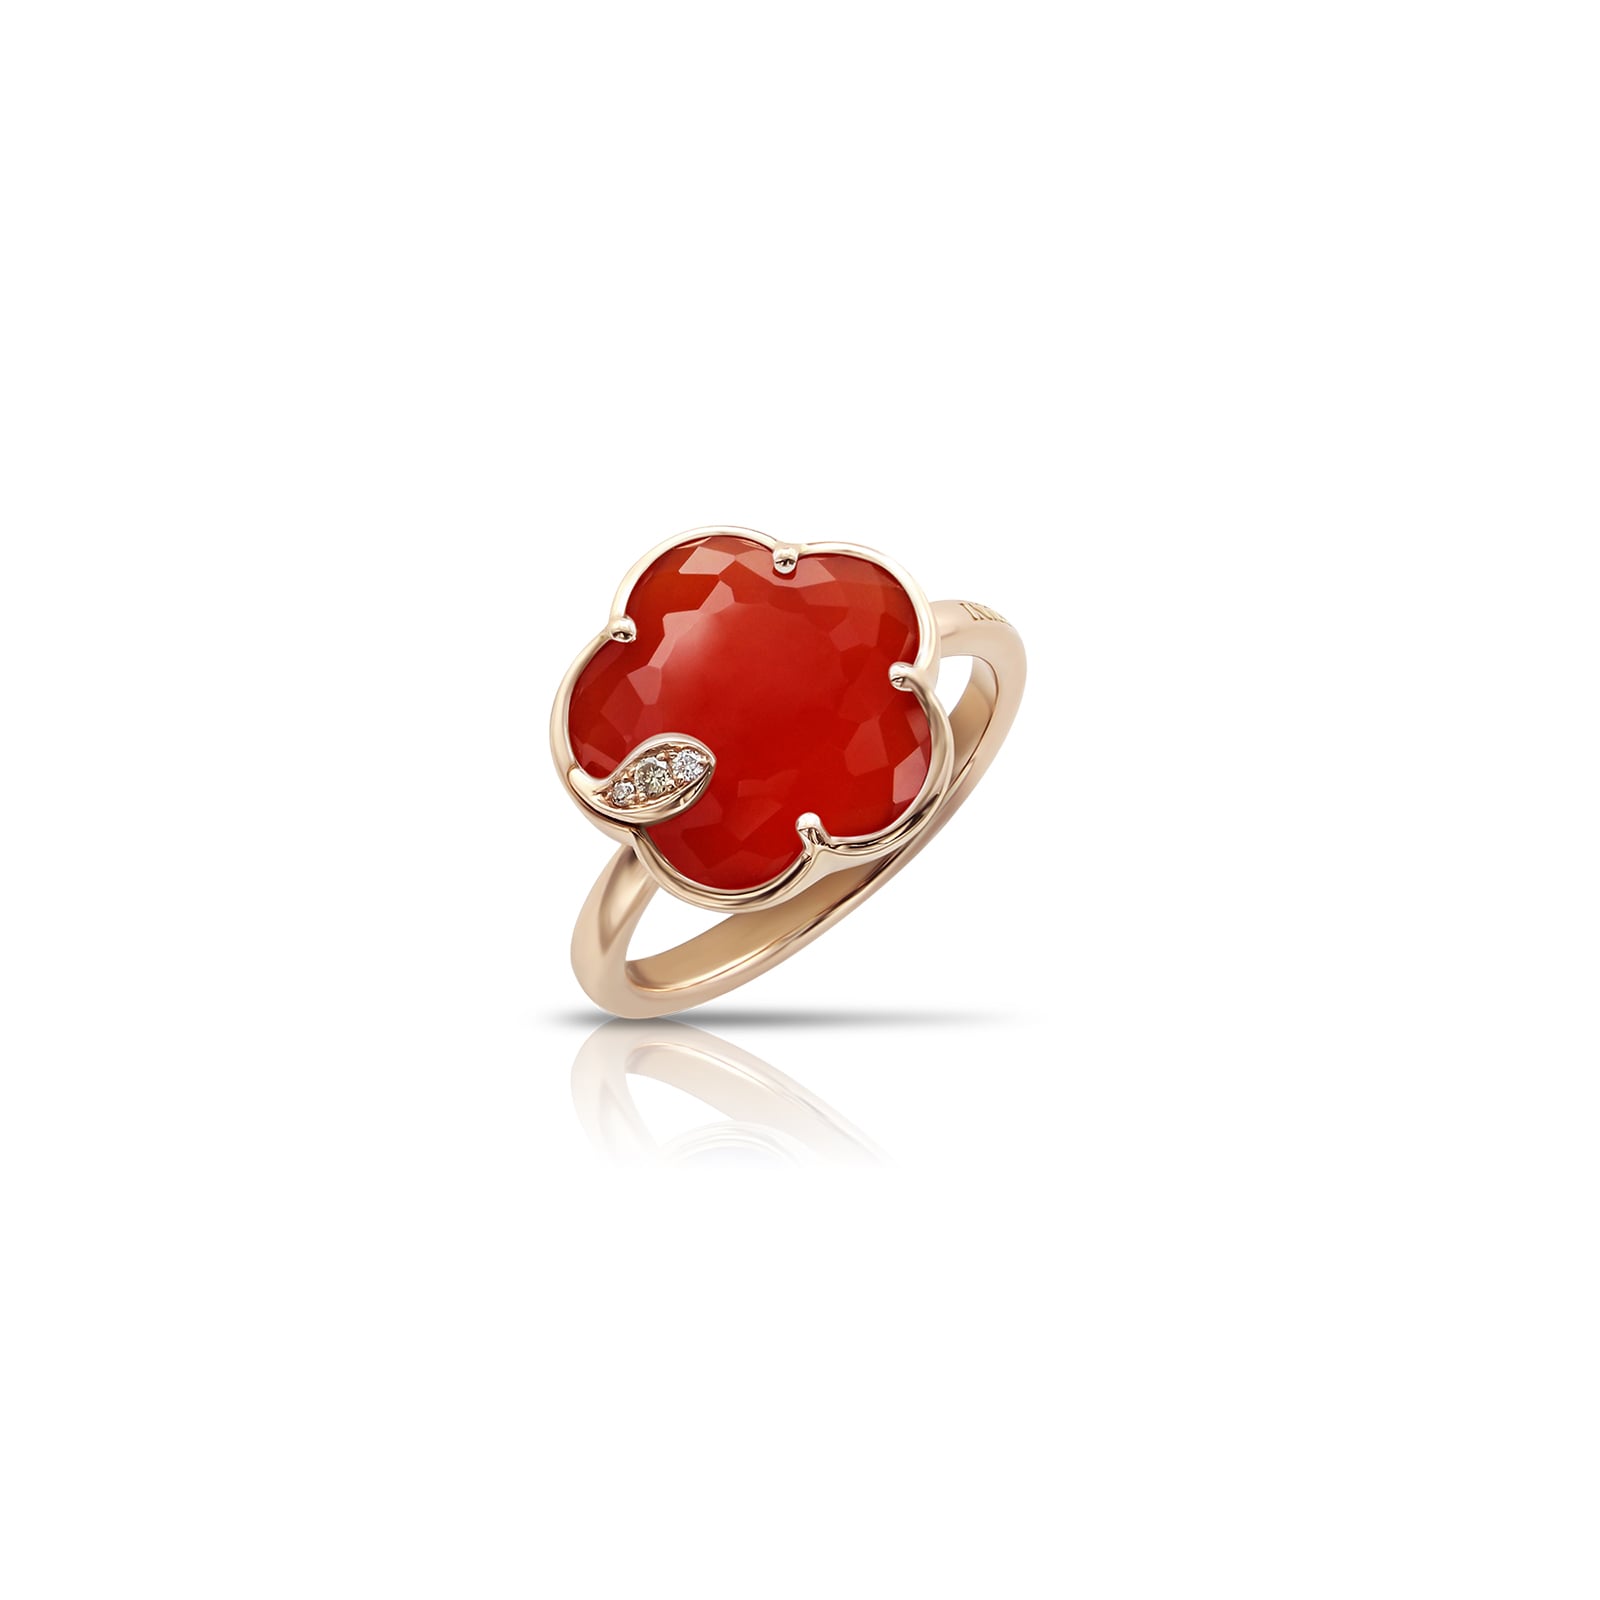 Petit Joli Ring in 18ct Rose Gold with Carnelian and Diamonds - Ring Size M